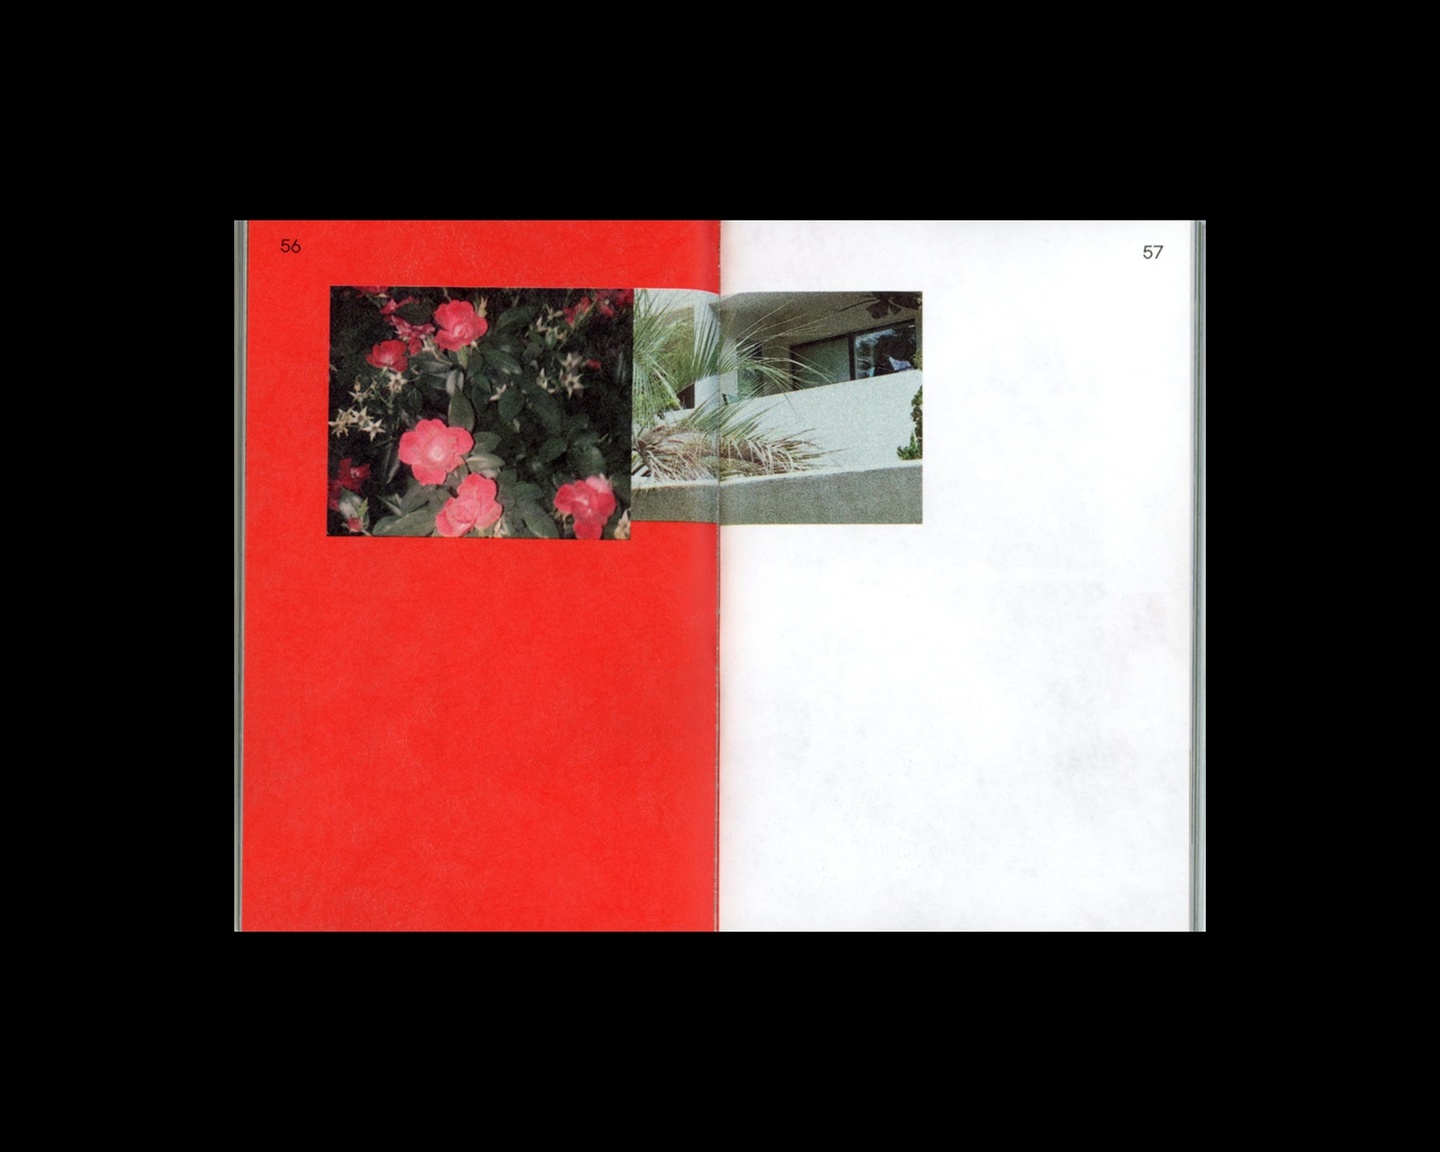 A photo of an open book, the left page red and the right page white, with a color photo laid across the center